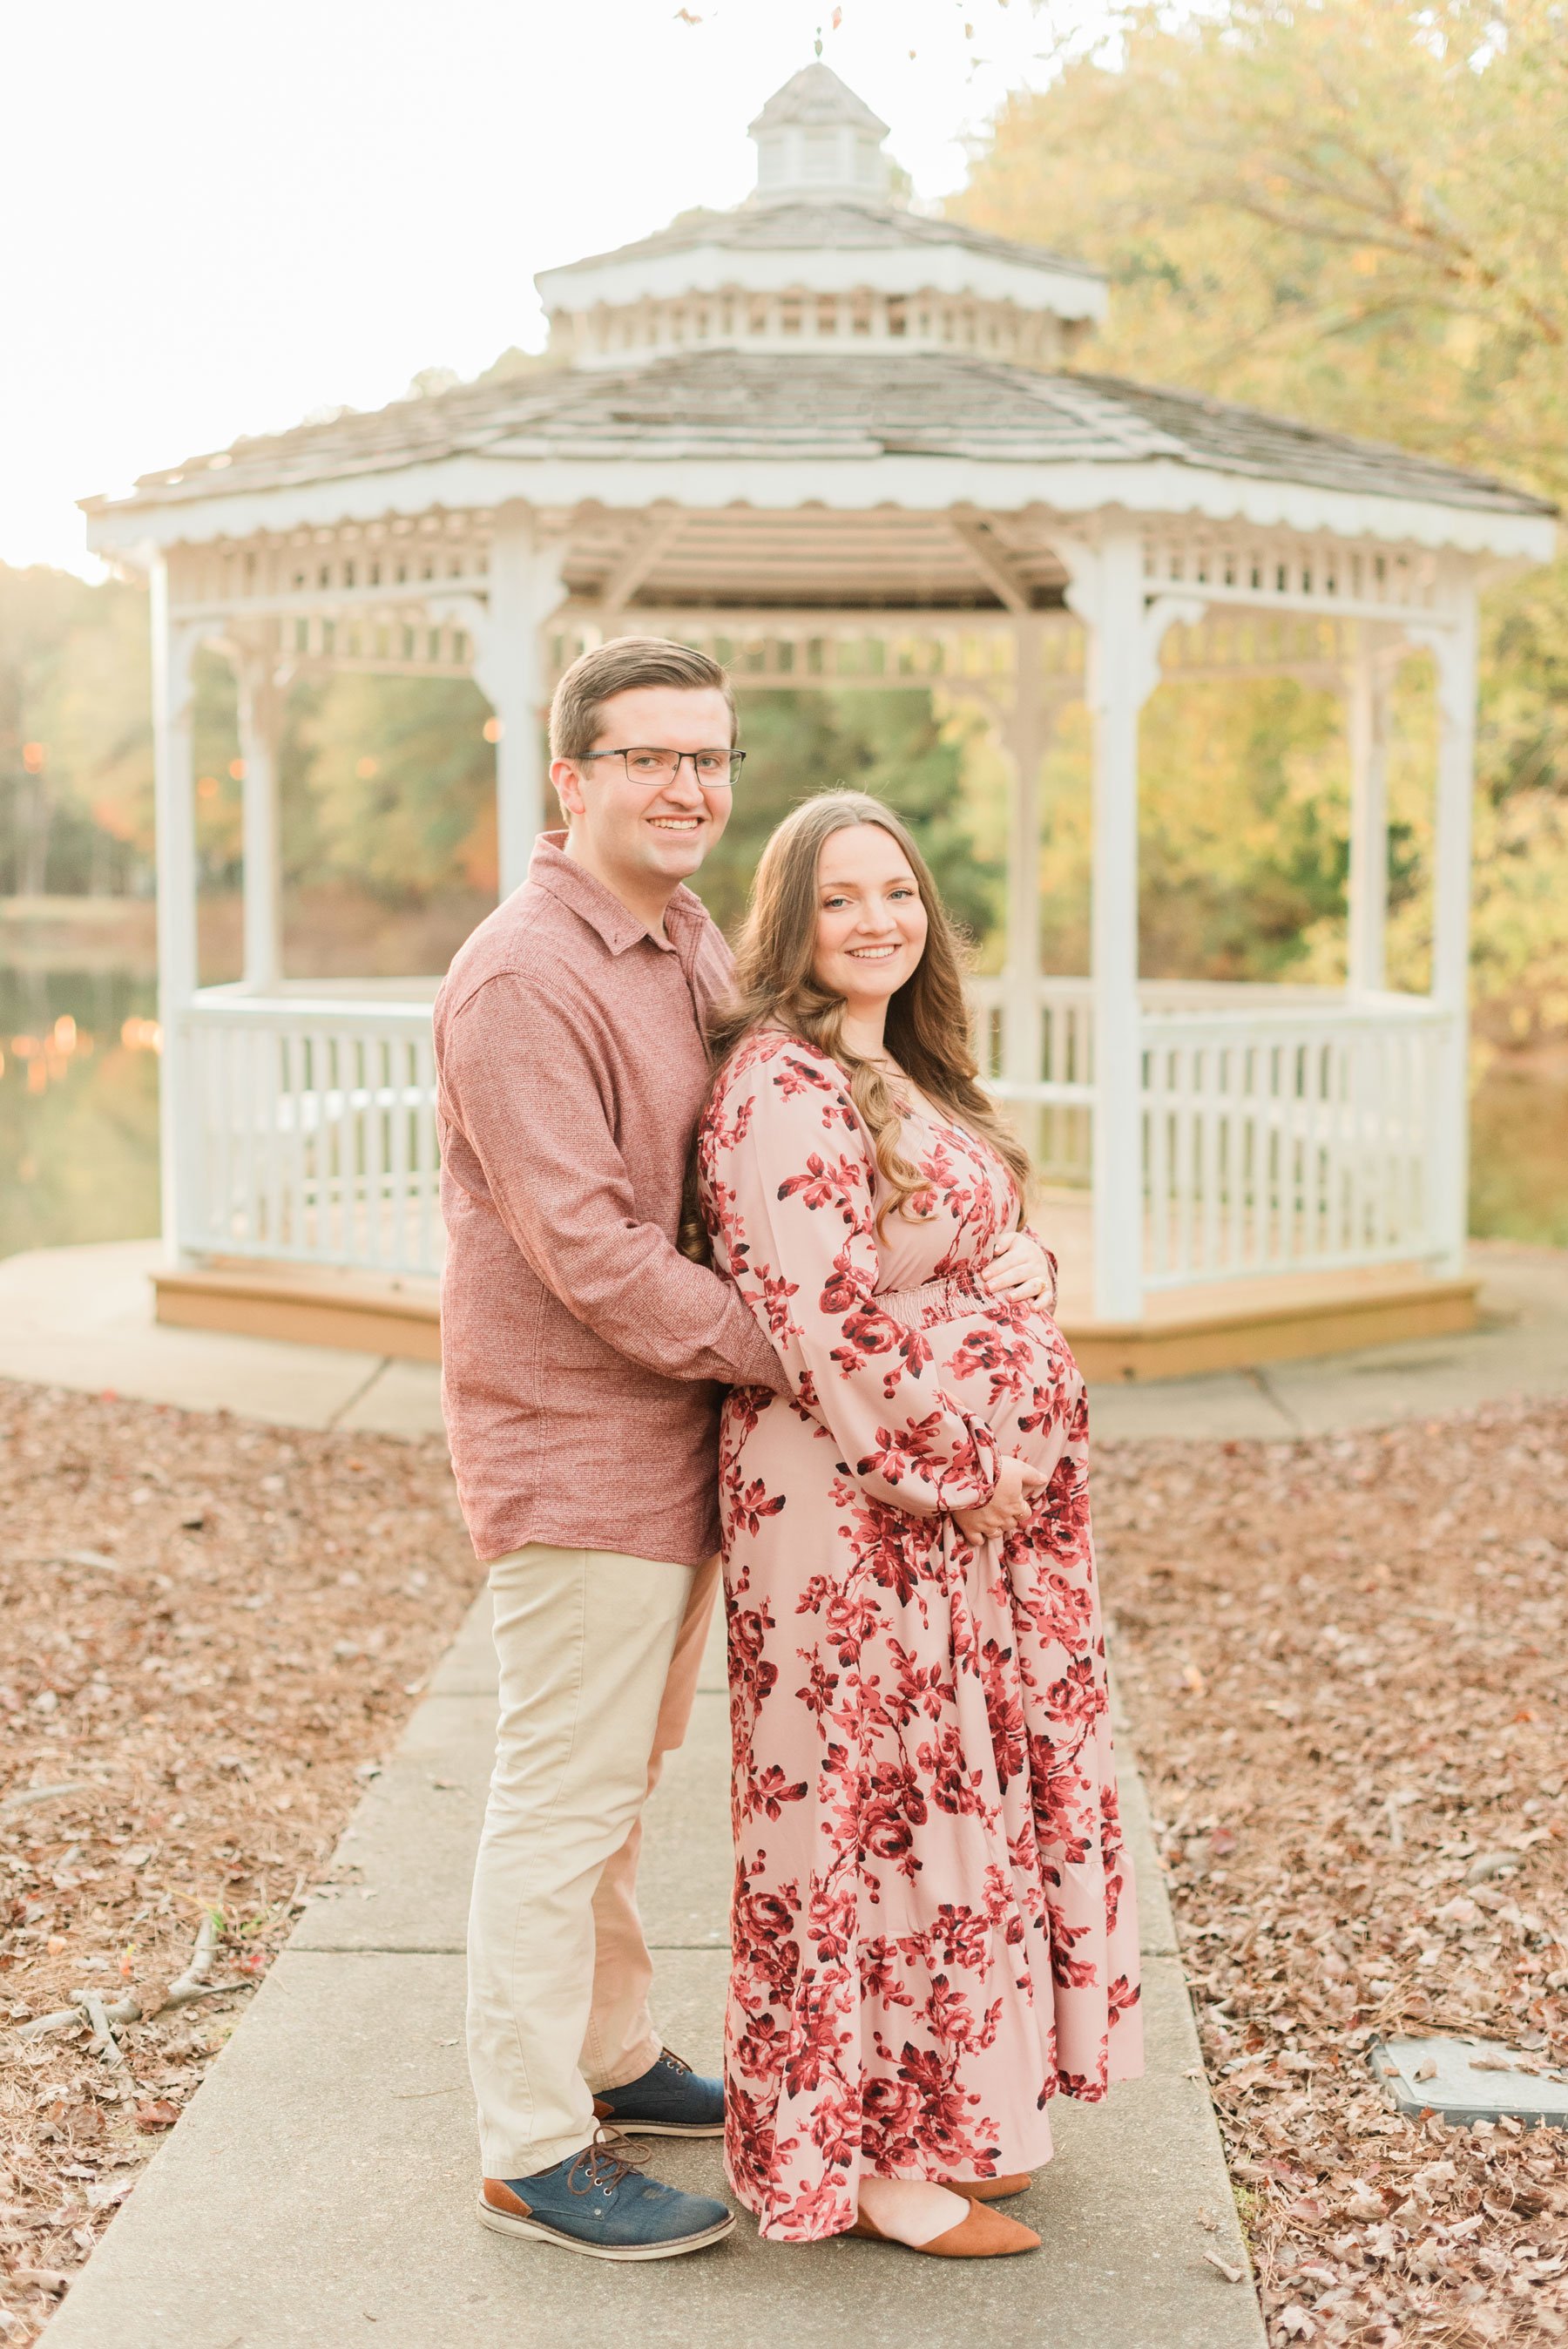  A husband stands behind his pregnant wife in front of a gazebo during their maternity photo session. Atlanta family photographer Sandy Springs Sharpsburg Roswell&nbsp; #familymaterintyphotos #pregnacyphotoshoot #littleboyphoto&nbsp; #peachtreecity #